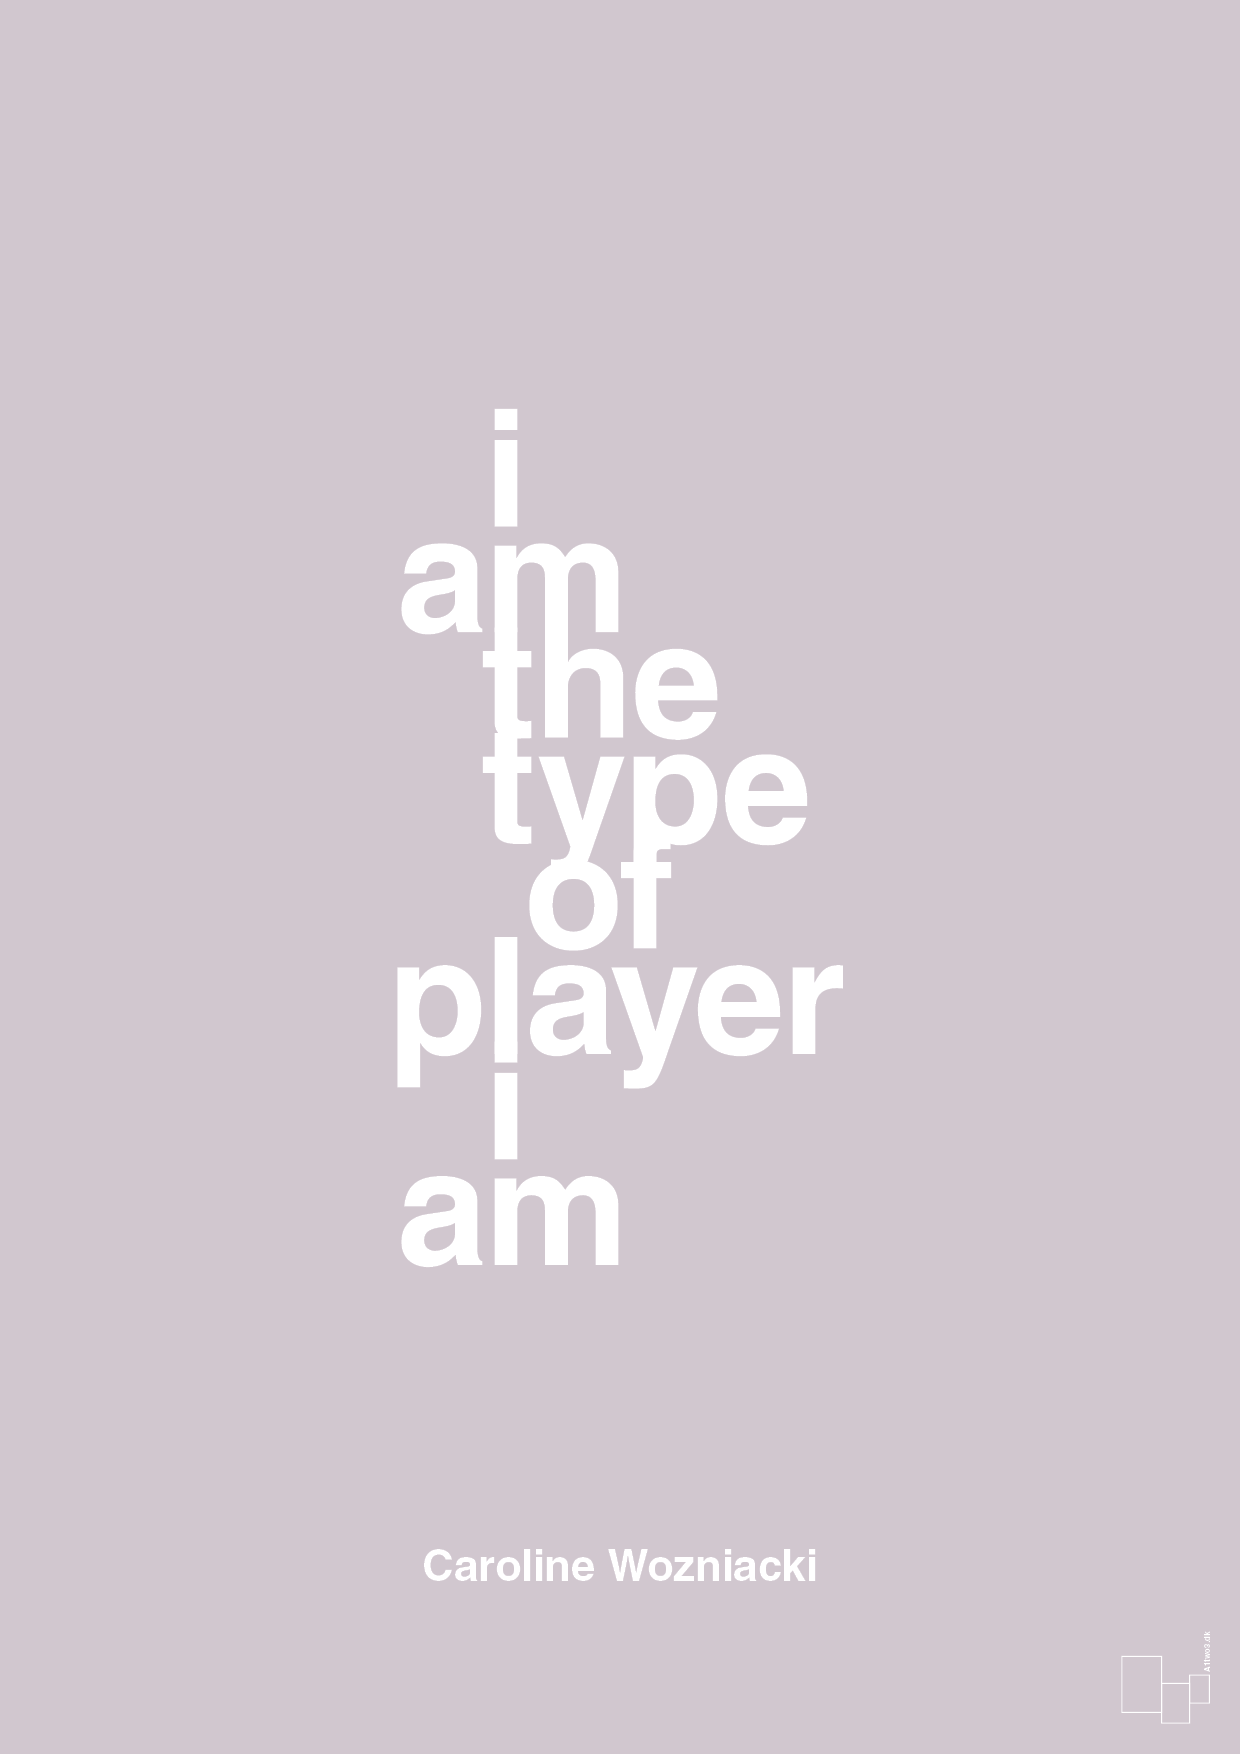 i am the type of player i am - Plakat med Citater i Dusty Lilac